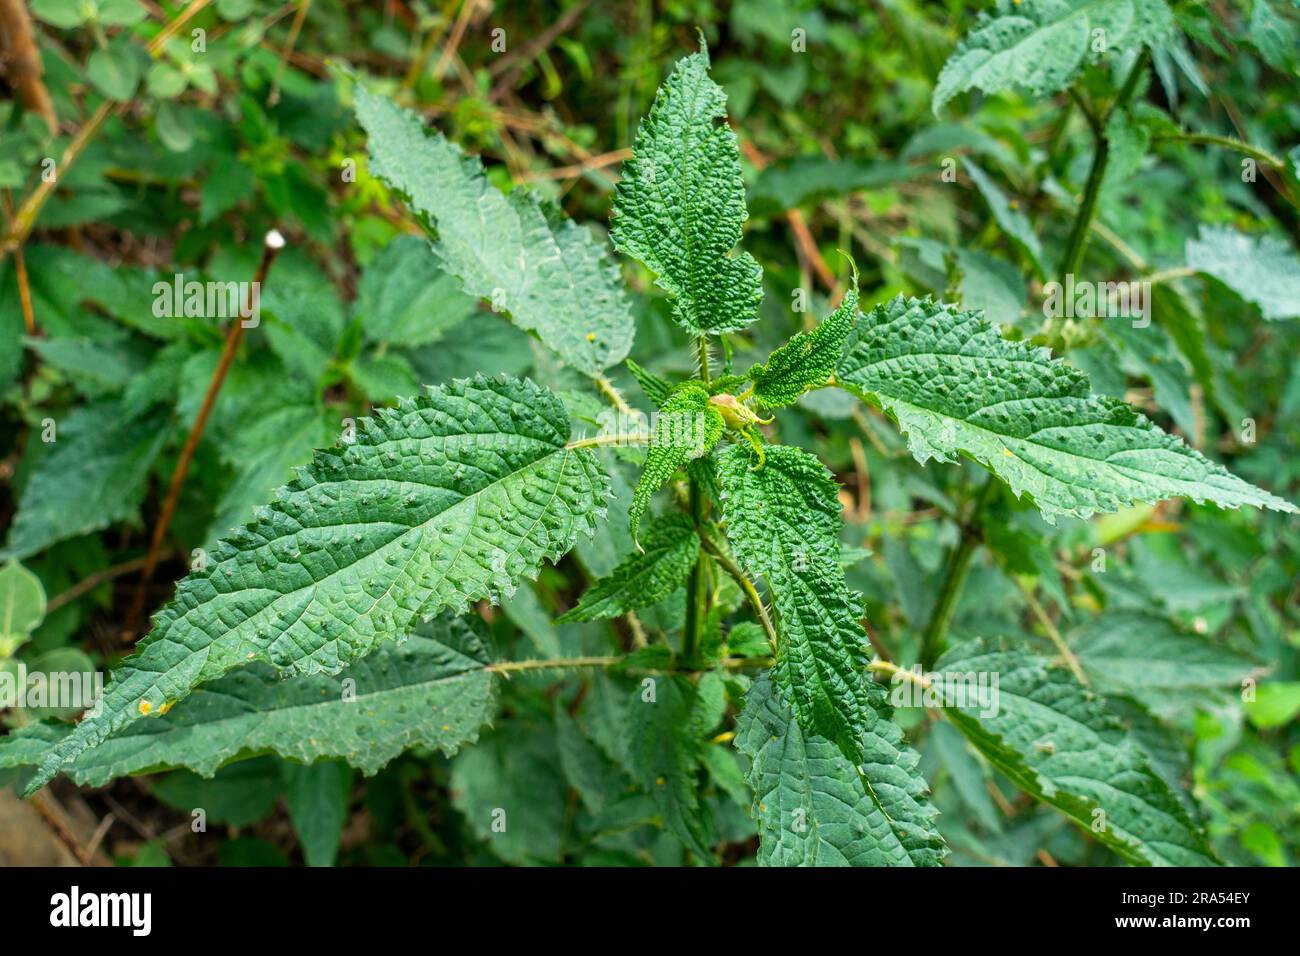 Close up shot of Urtica dioics also know as common nettle plant with thorny leaves. Also called Kandali Himalayan region of Uttarakhand, India Stock Photo